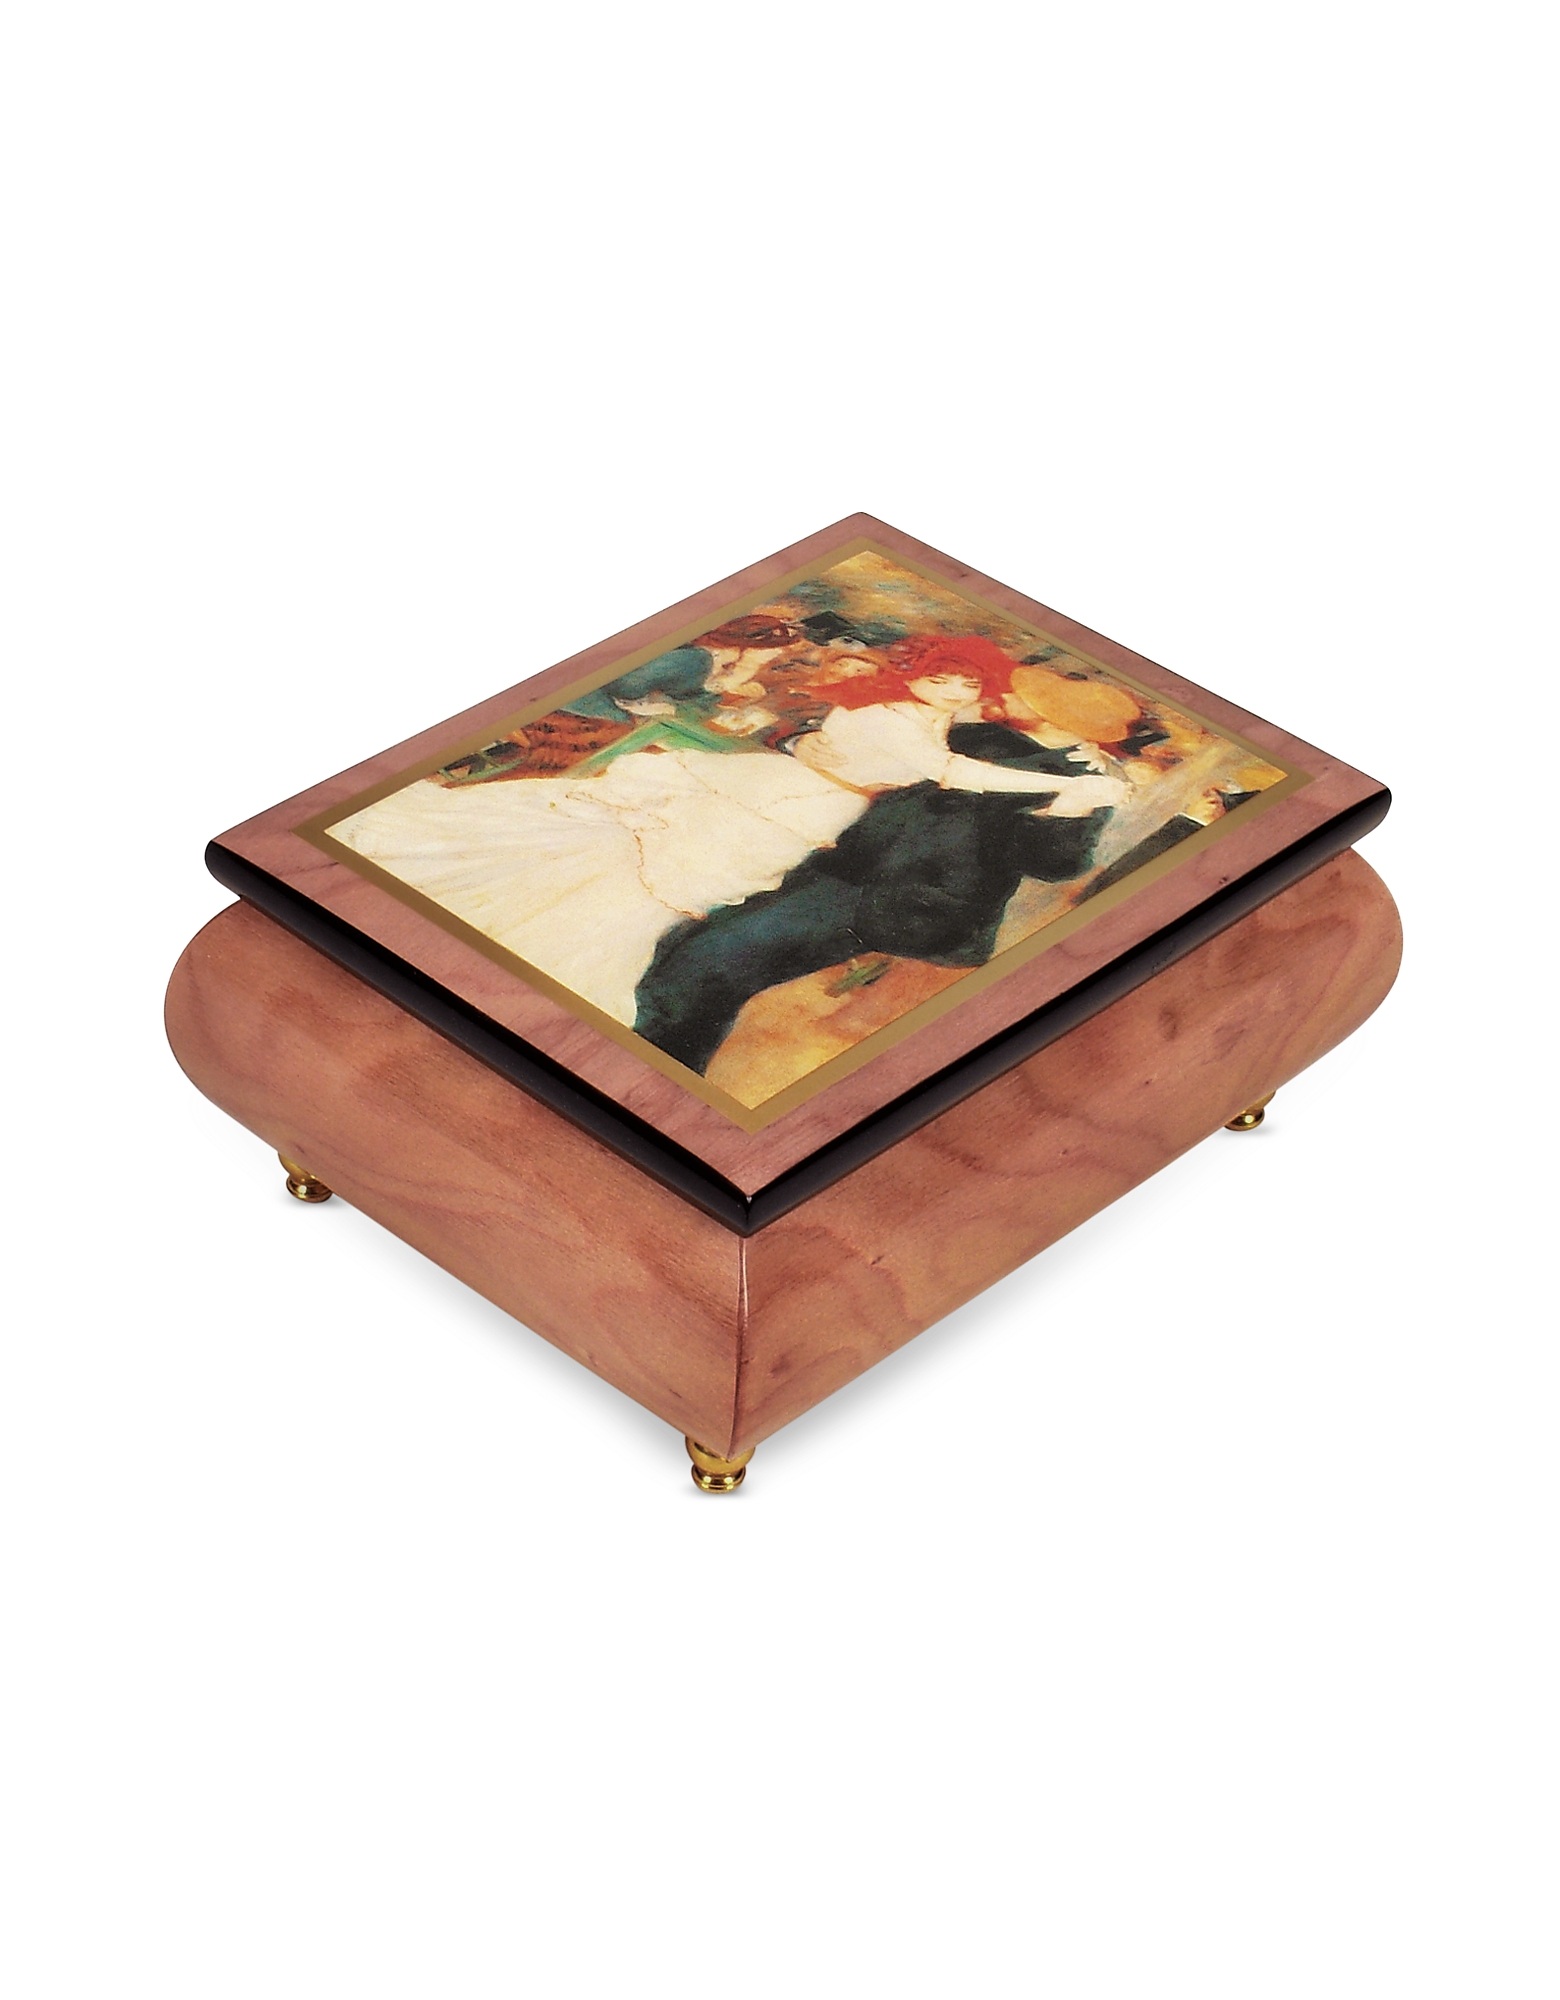 

It's a Small World - "Dance at Bougival" Musical Jewelry Box, Pink